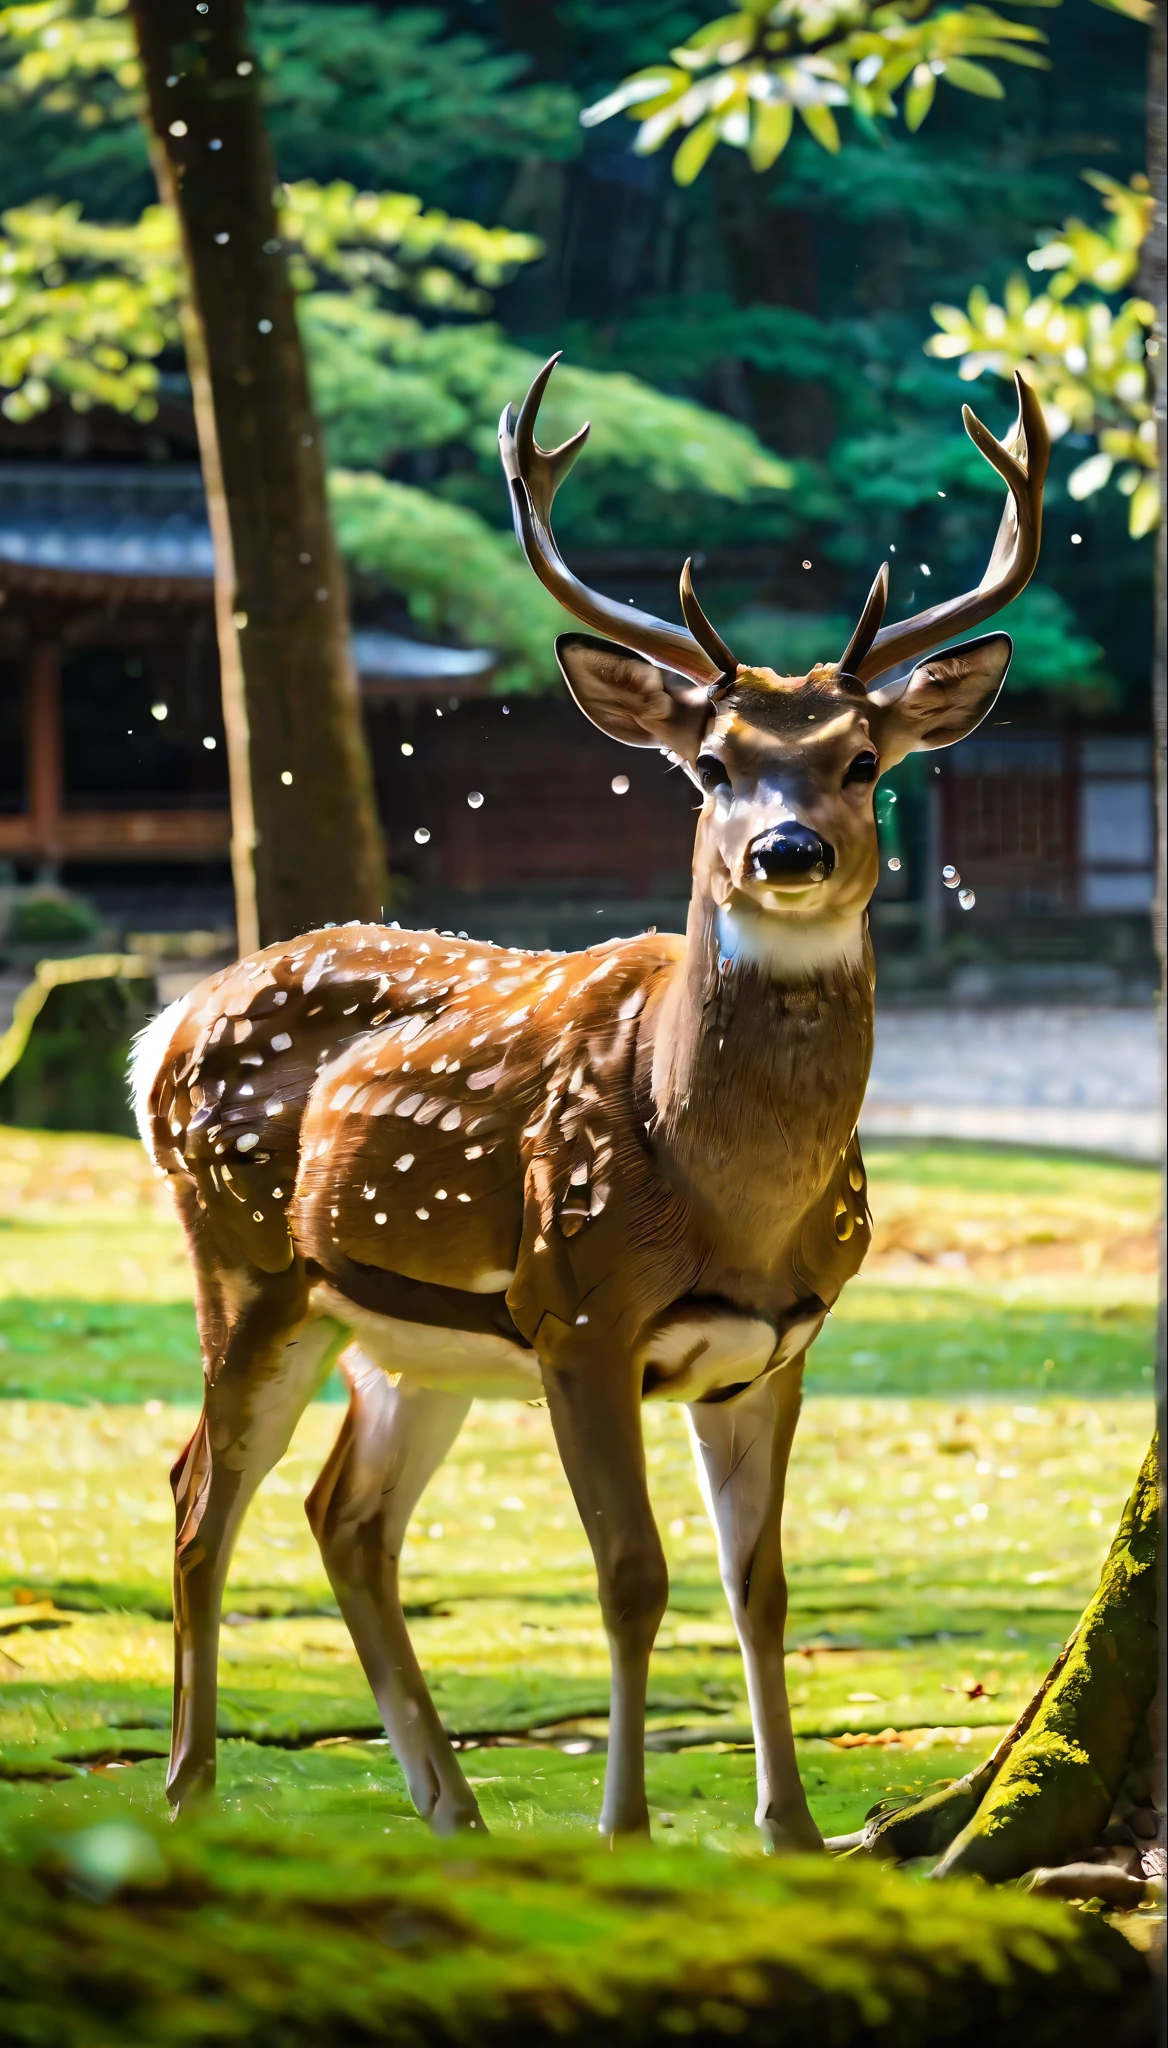 (best quality,realistic,animal photography),Sika deer at Kasuga Taisha temple in Nara(wildlife,deer,park),raw photo(reflection,autumn,lighting,bokeh),natural colors(brown,green),vibrant foliage,trees in the background,lush grass,serene atmosphere,sunlight filtering through the leaves,majestic antlers,noble expression,peaceful pose,unobstructed view,sharp focus(moment frozen in time),dewdrops on the grass,autumn leaves scattered on the ground,quiet elegance,majestic beauty.